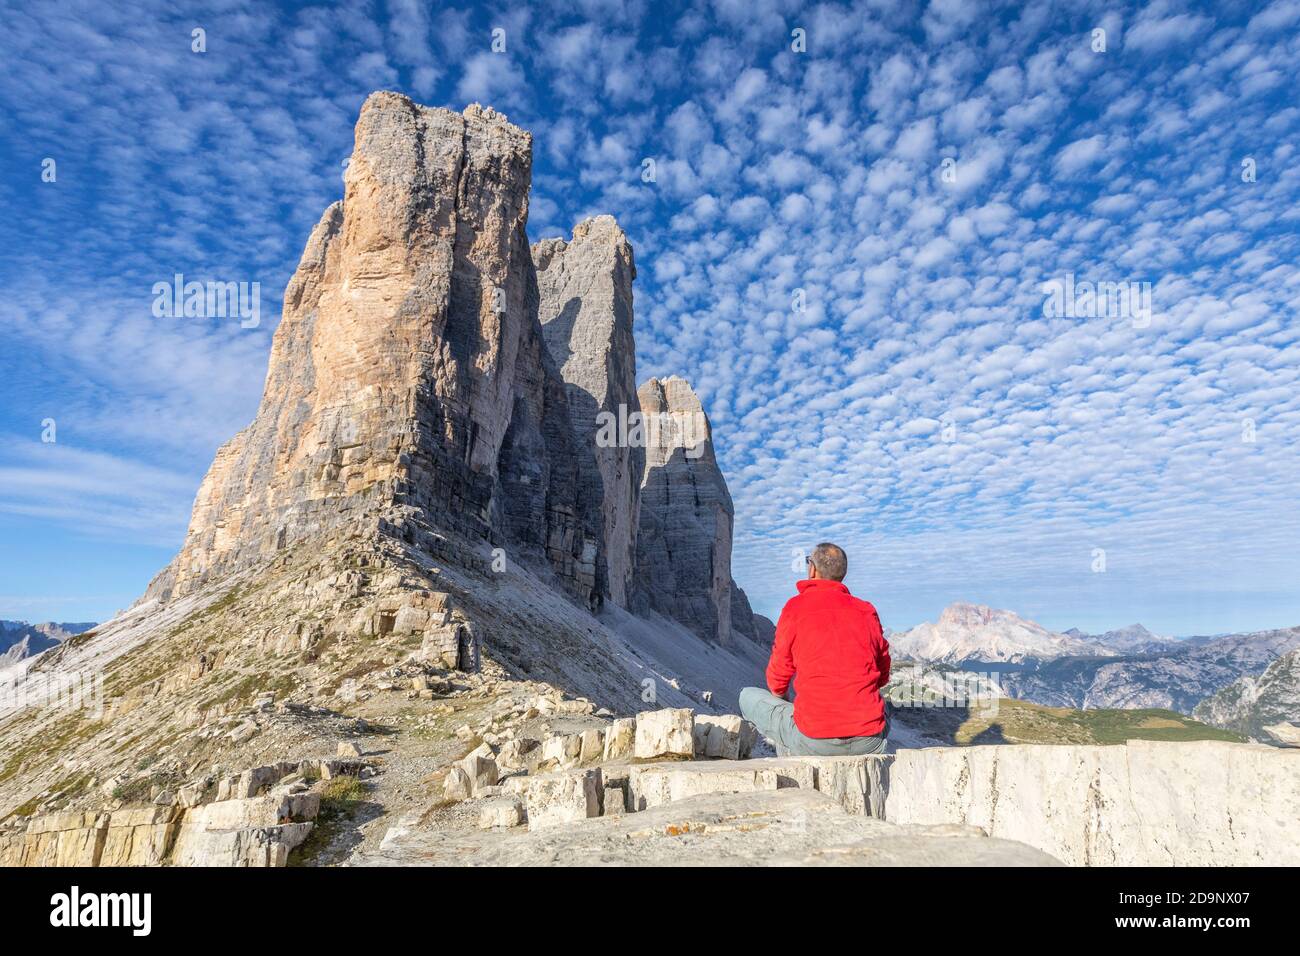 lonely man, from 45 to 50 years old, sitting at the lavaredo fork, at the foot of the Tre Cime di Lavaredo, Dolomites mountains, Auronzo di Cadore, Belluno province, Veneto, Italy, Europe Stock Photo